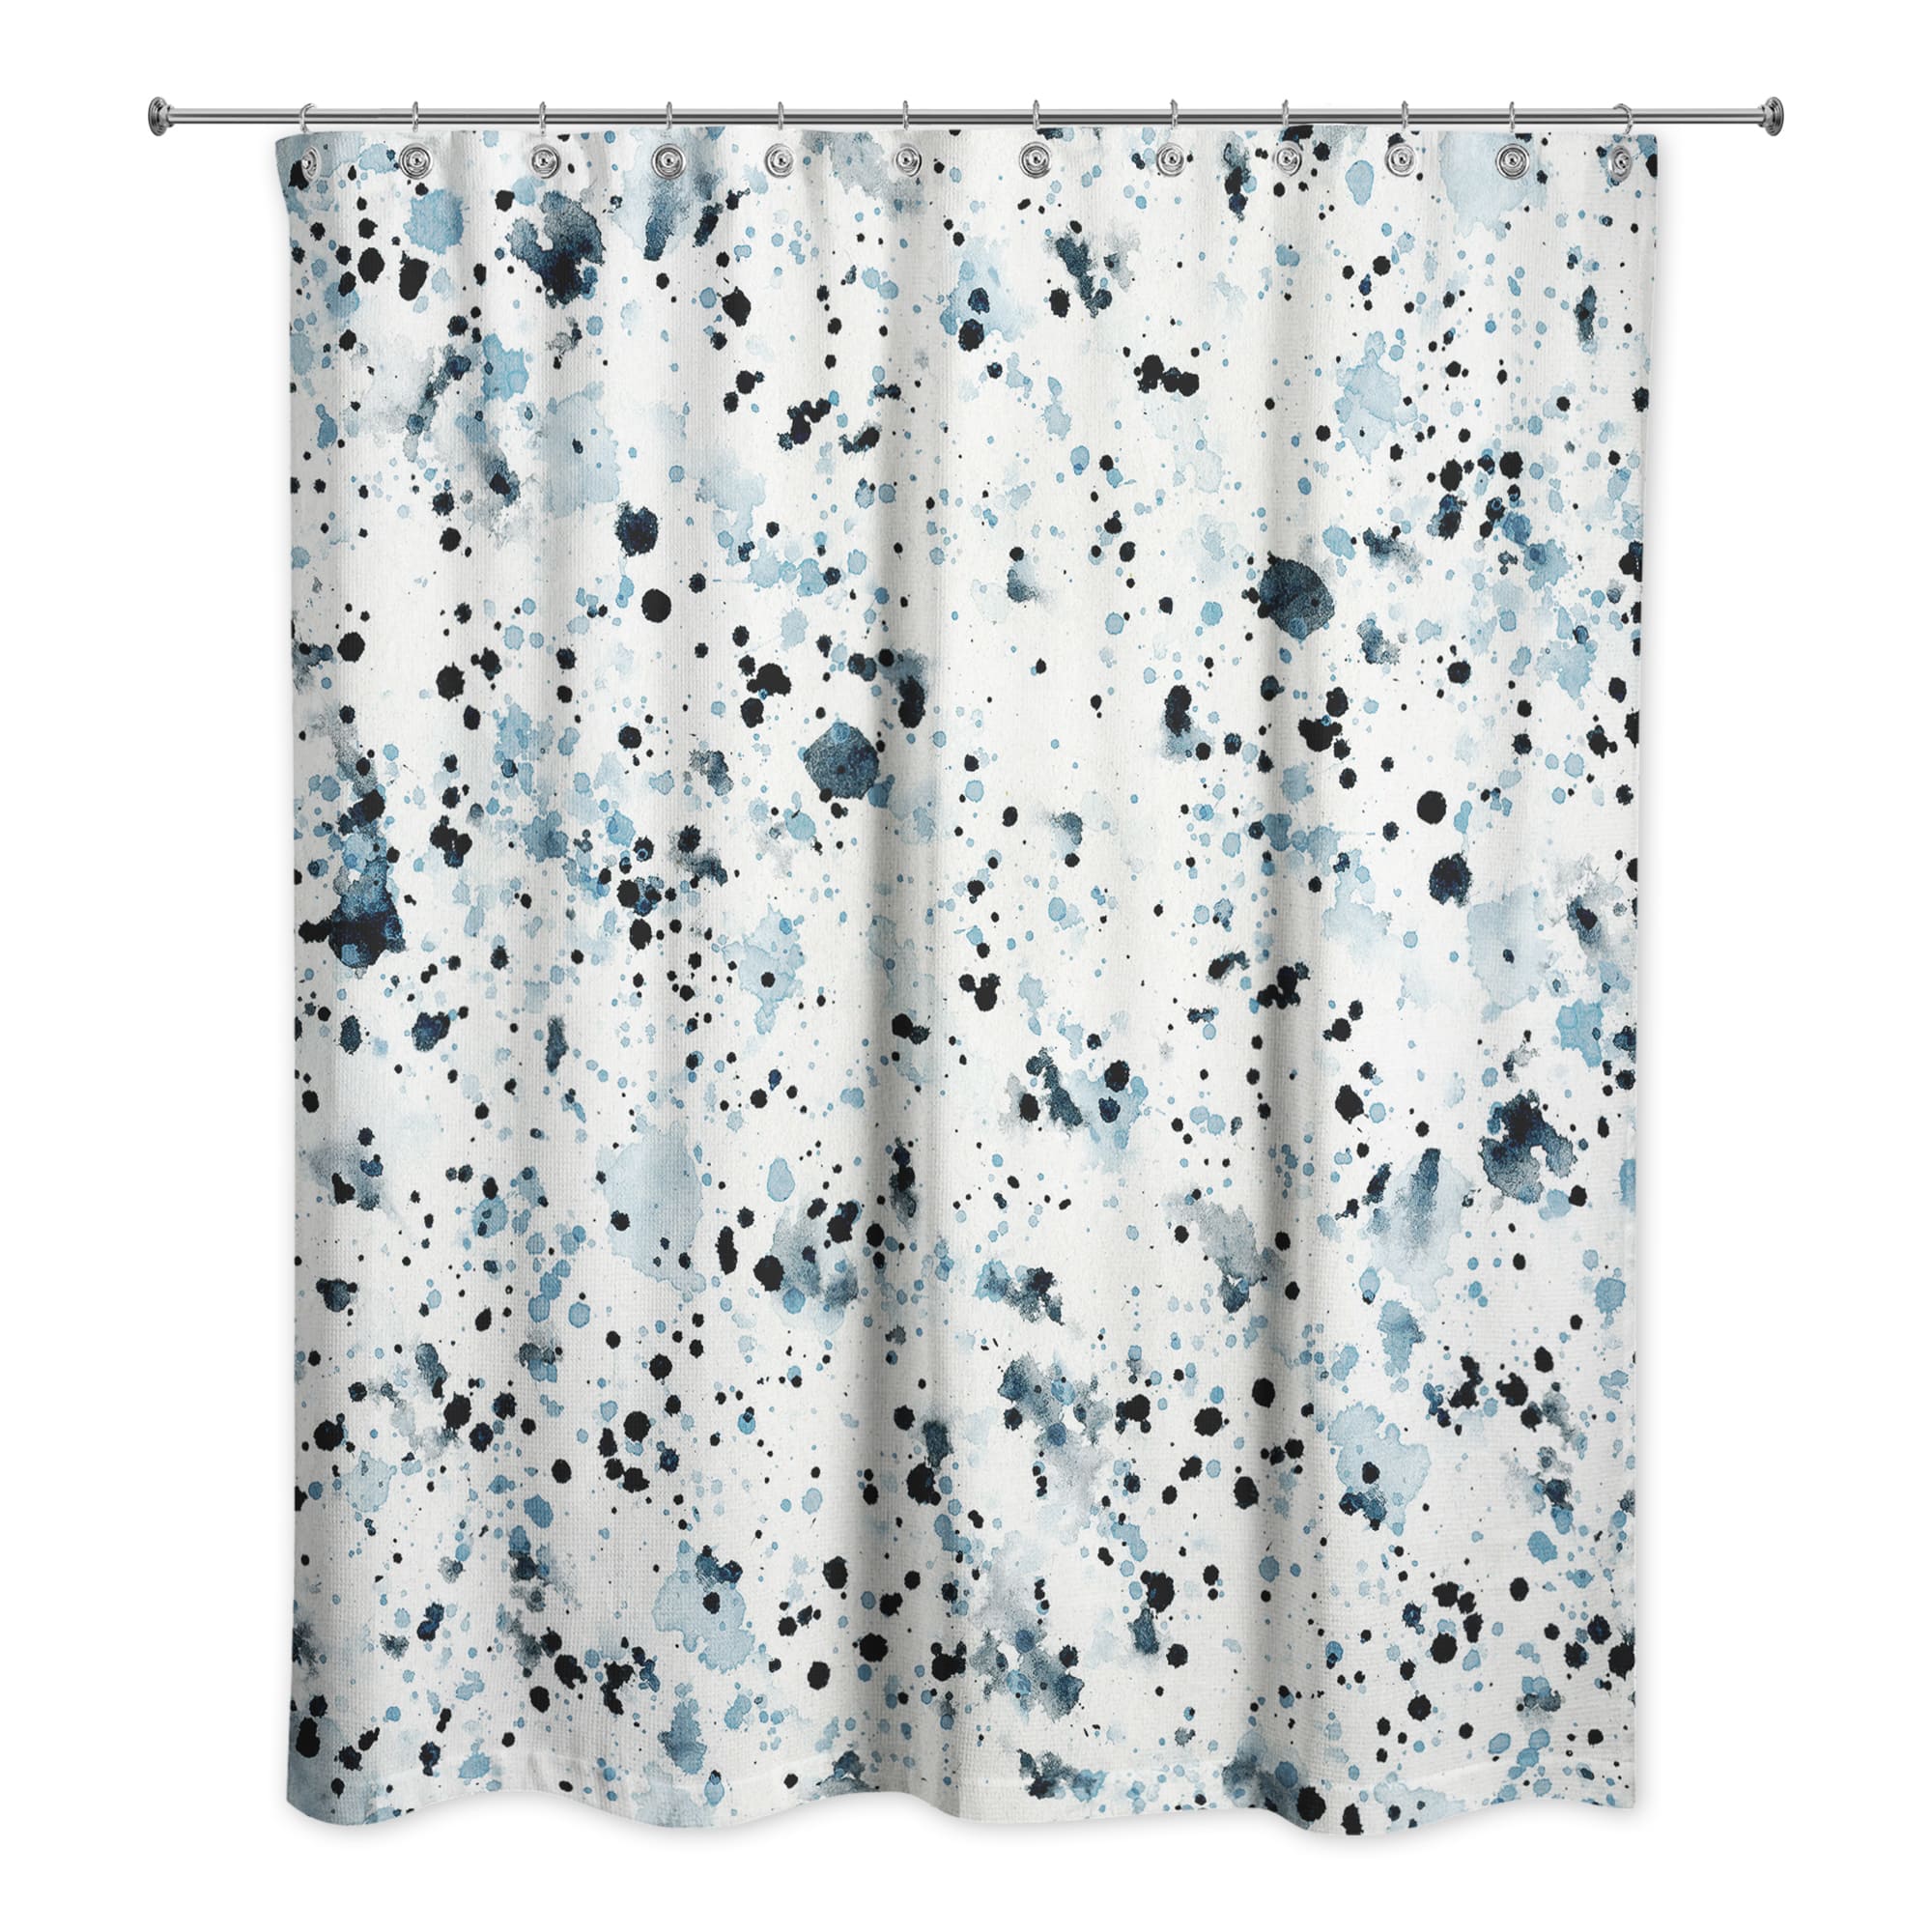 Speckled Shower Curtain